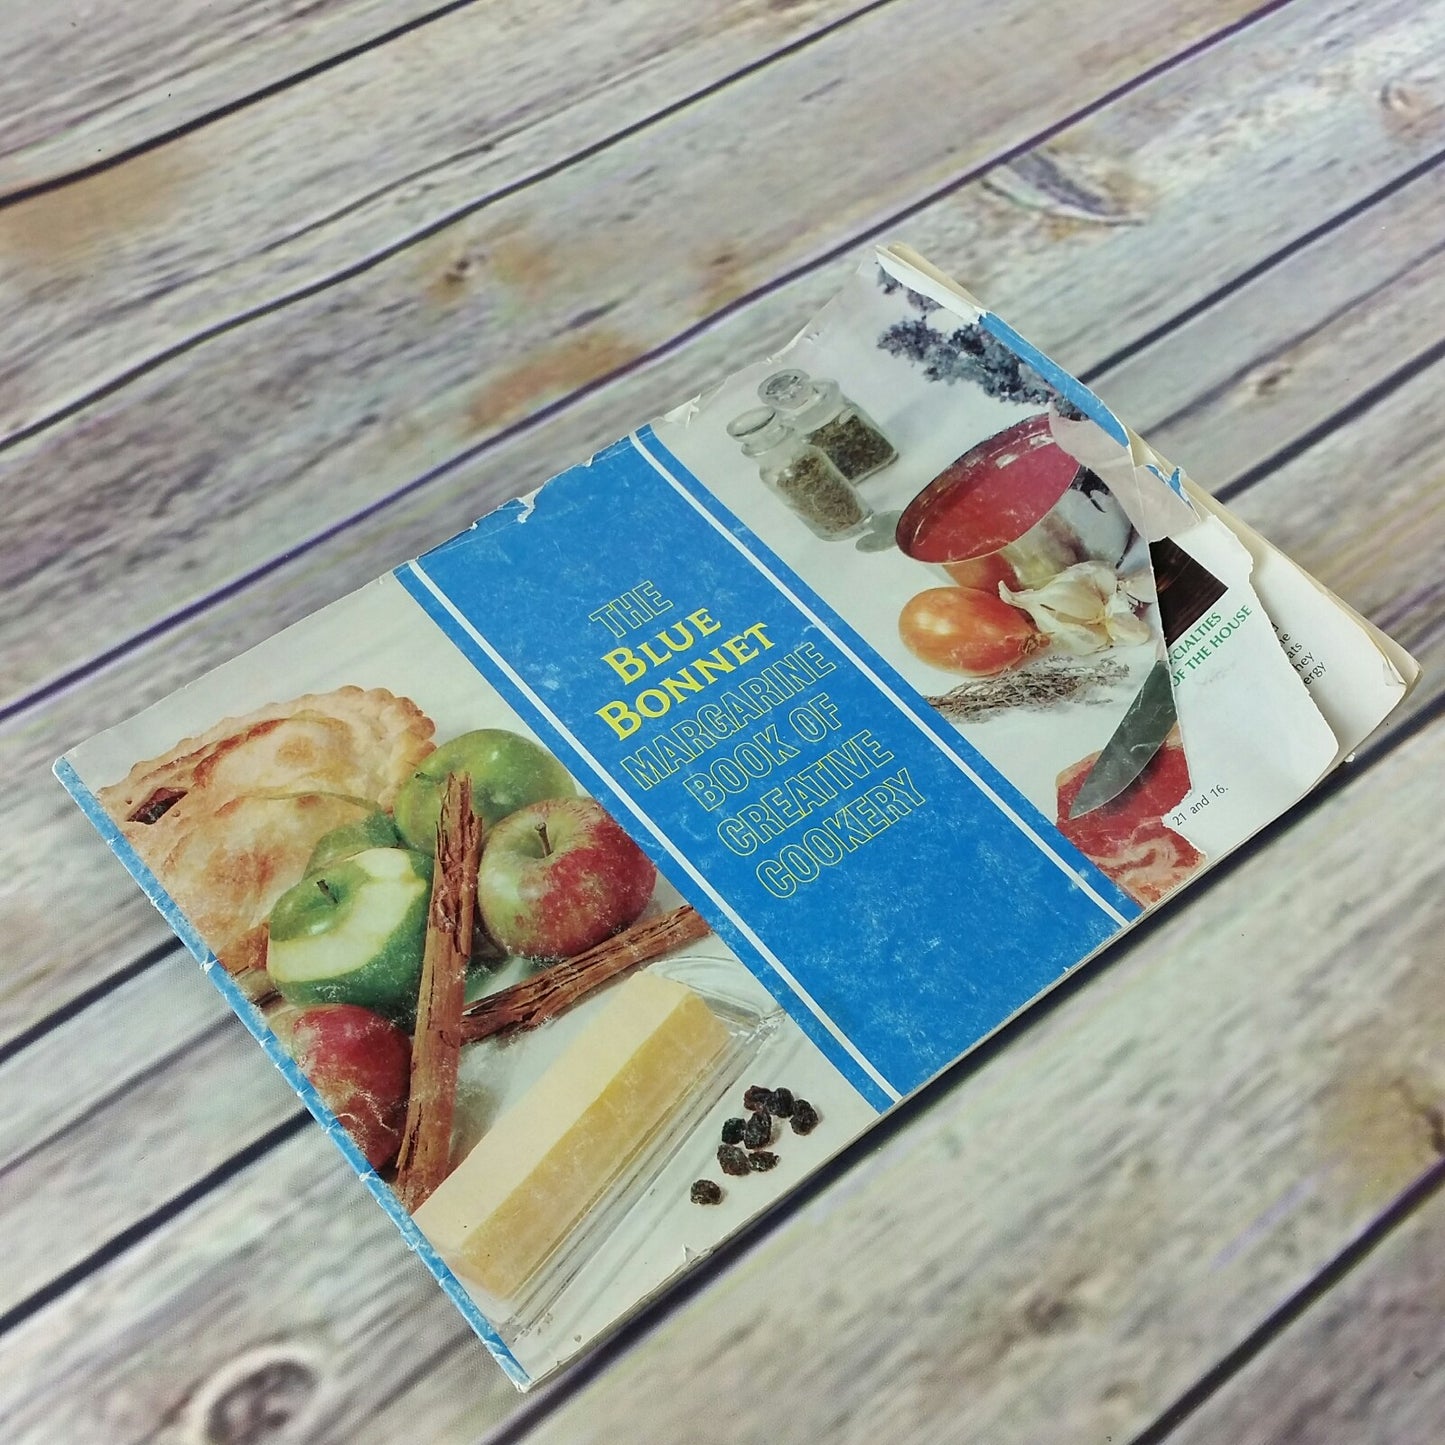 Vintage Cookbook The Blue Bonnet Margarine Book of Creative Cookery 1970s - At Grandma's Table